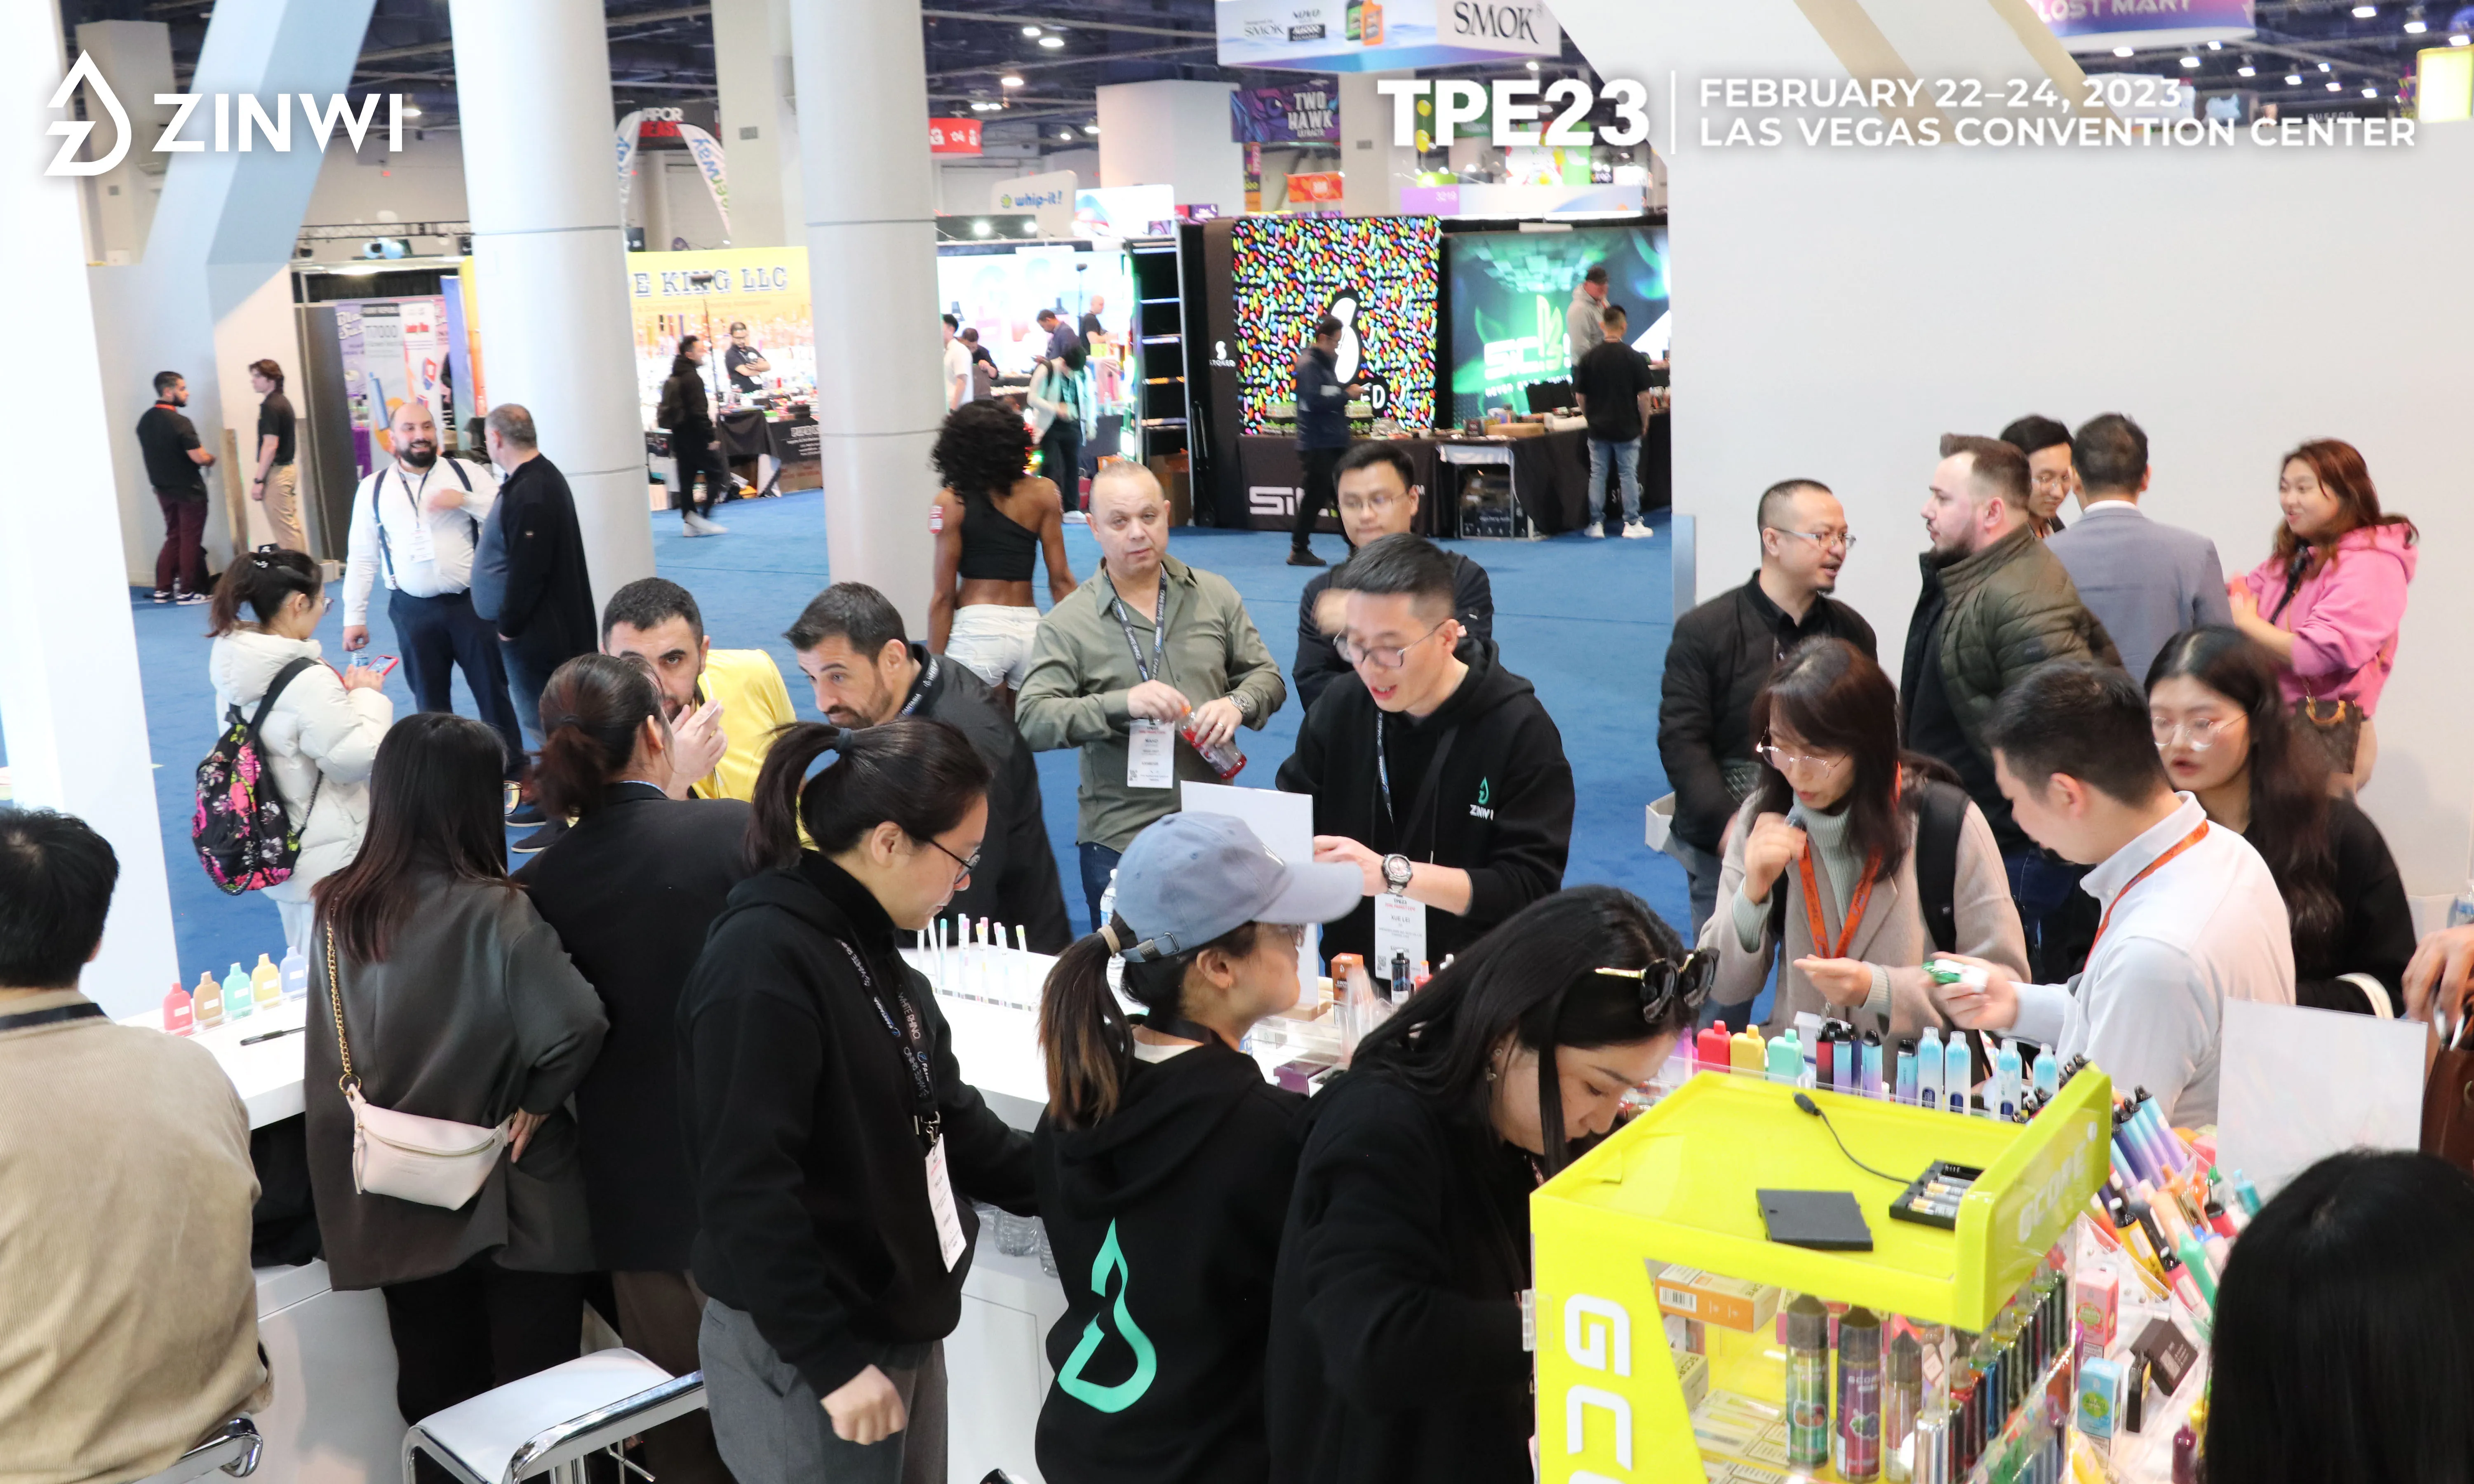 Zinwi biotech has become the focus of TPE23